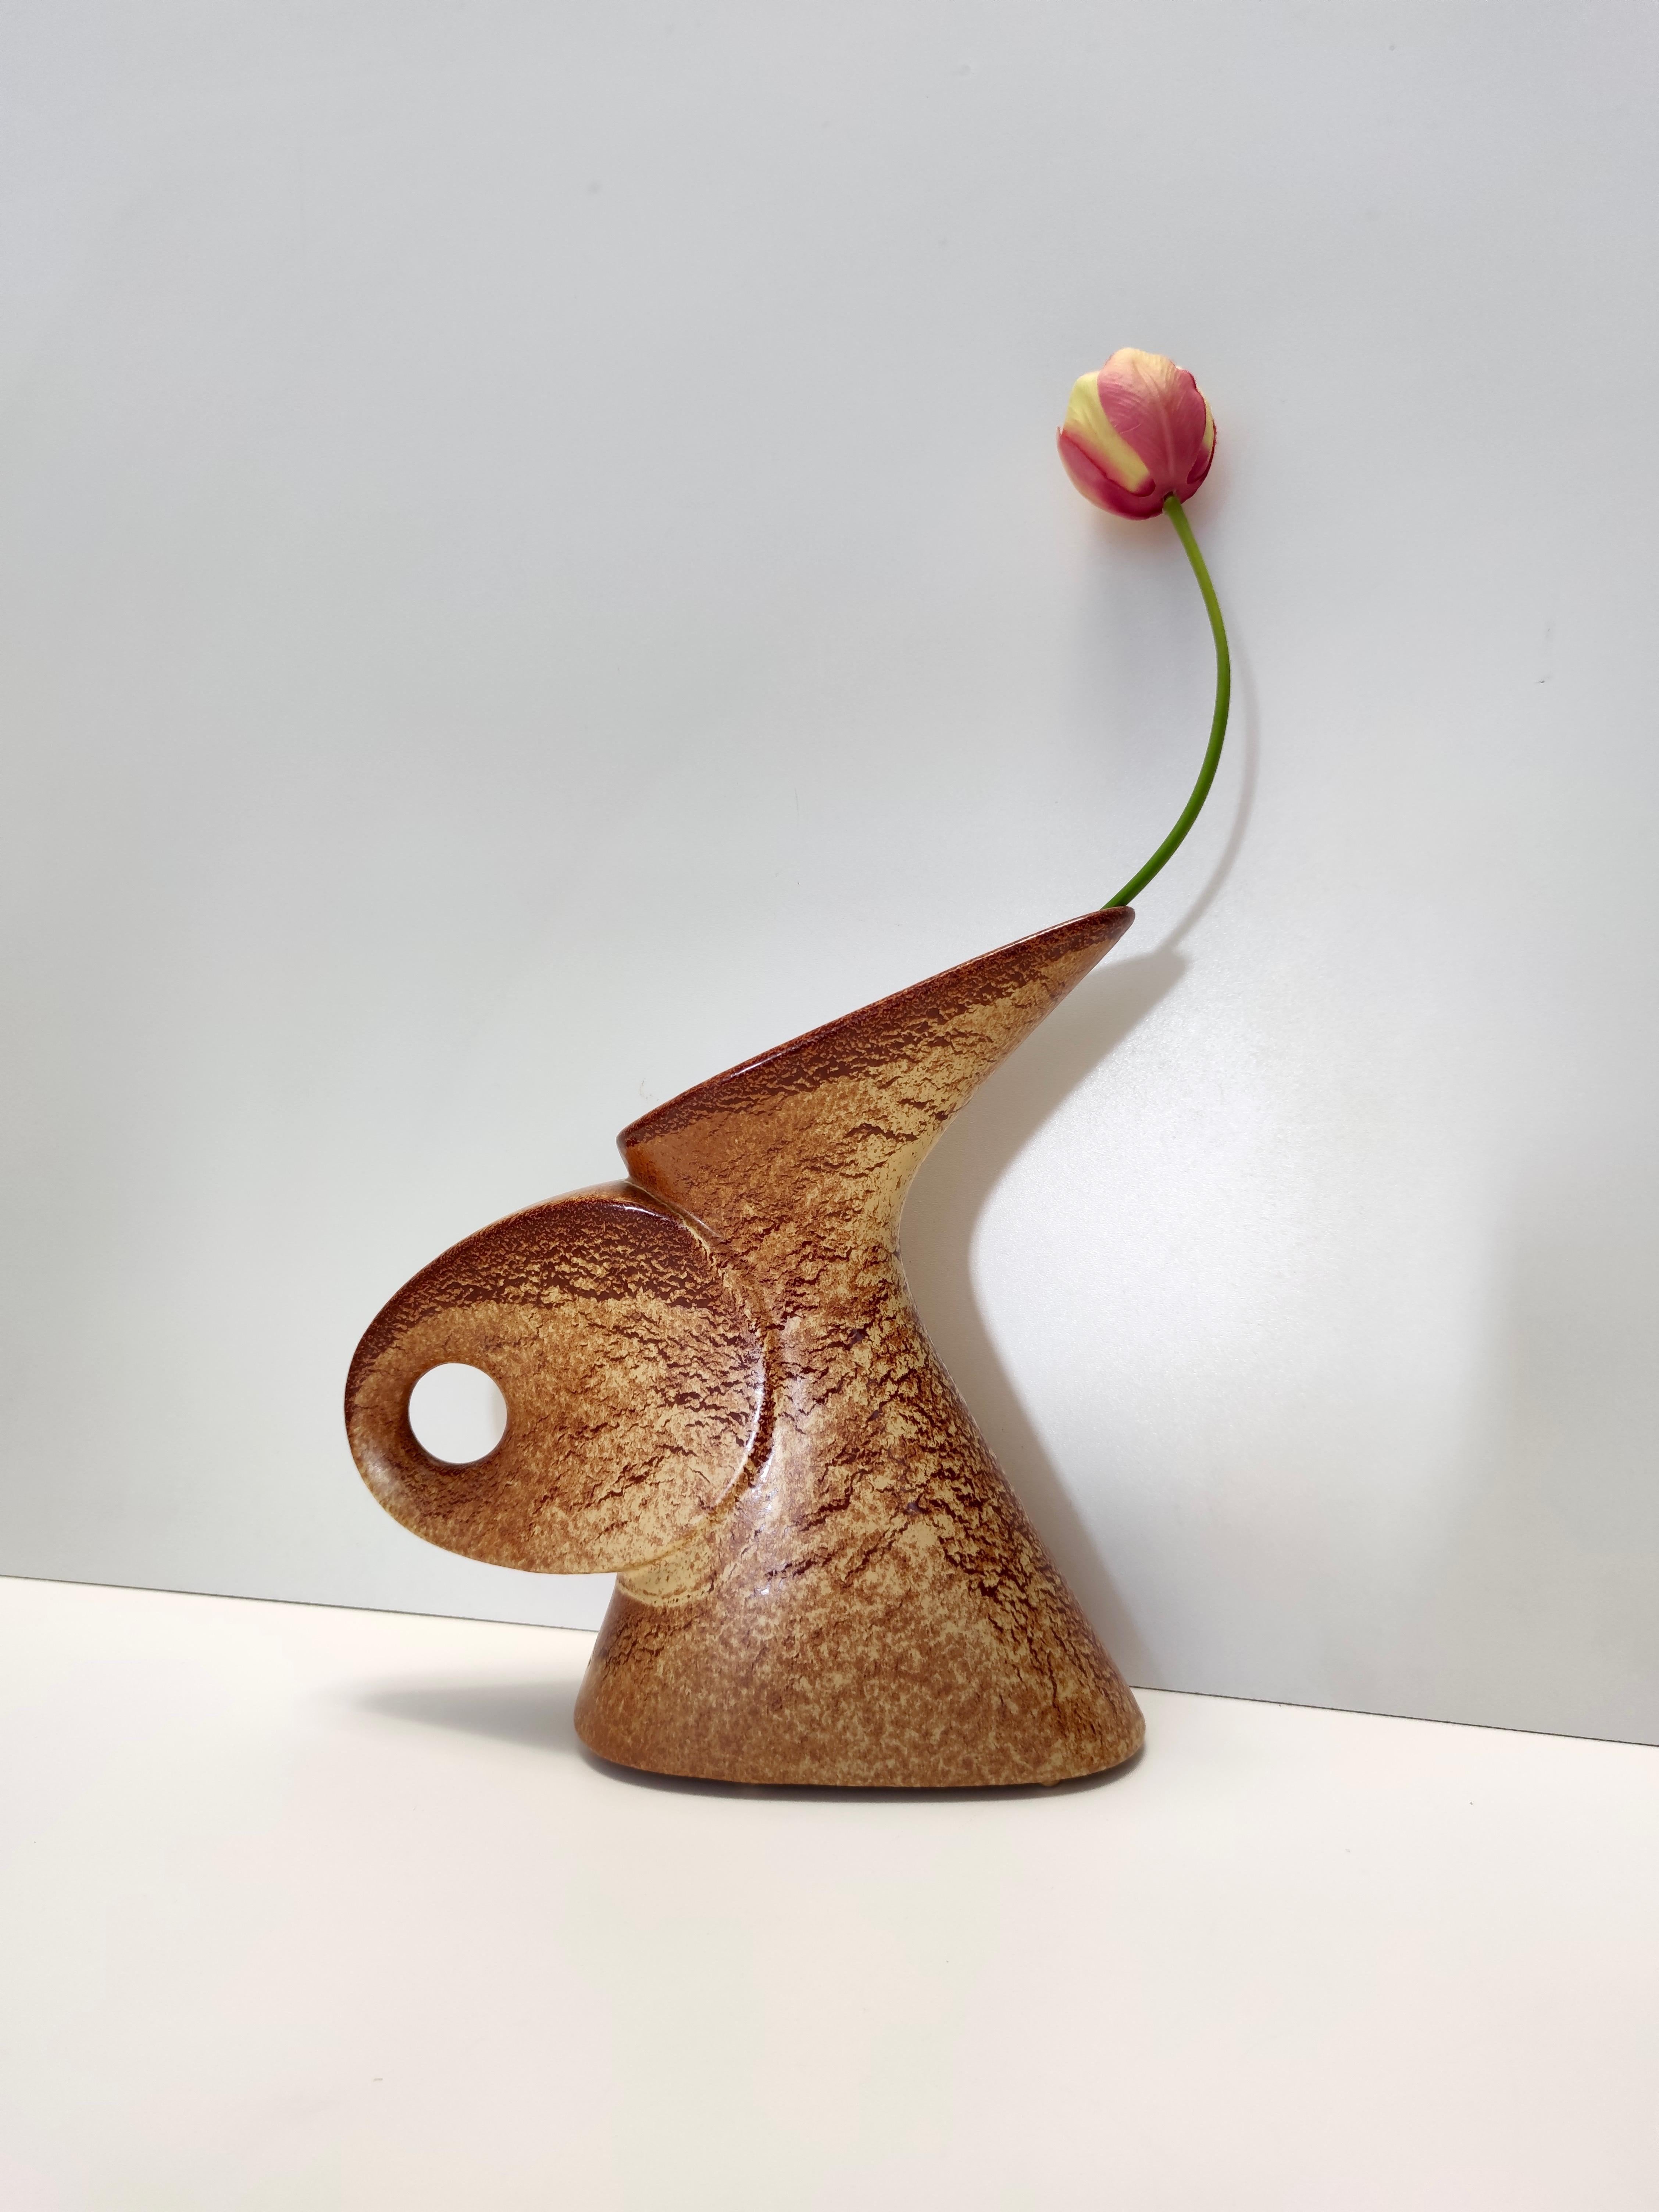 Made in Italy by Giovanni Bertoncello for Schiavon, 1970s.
It is made in brown glazed ceramic.
It is a vintage piece, therefore it might show slight traces of use, but it can be considered as in excellent original condition and ready to become a